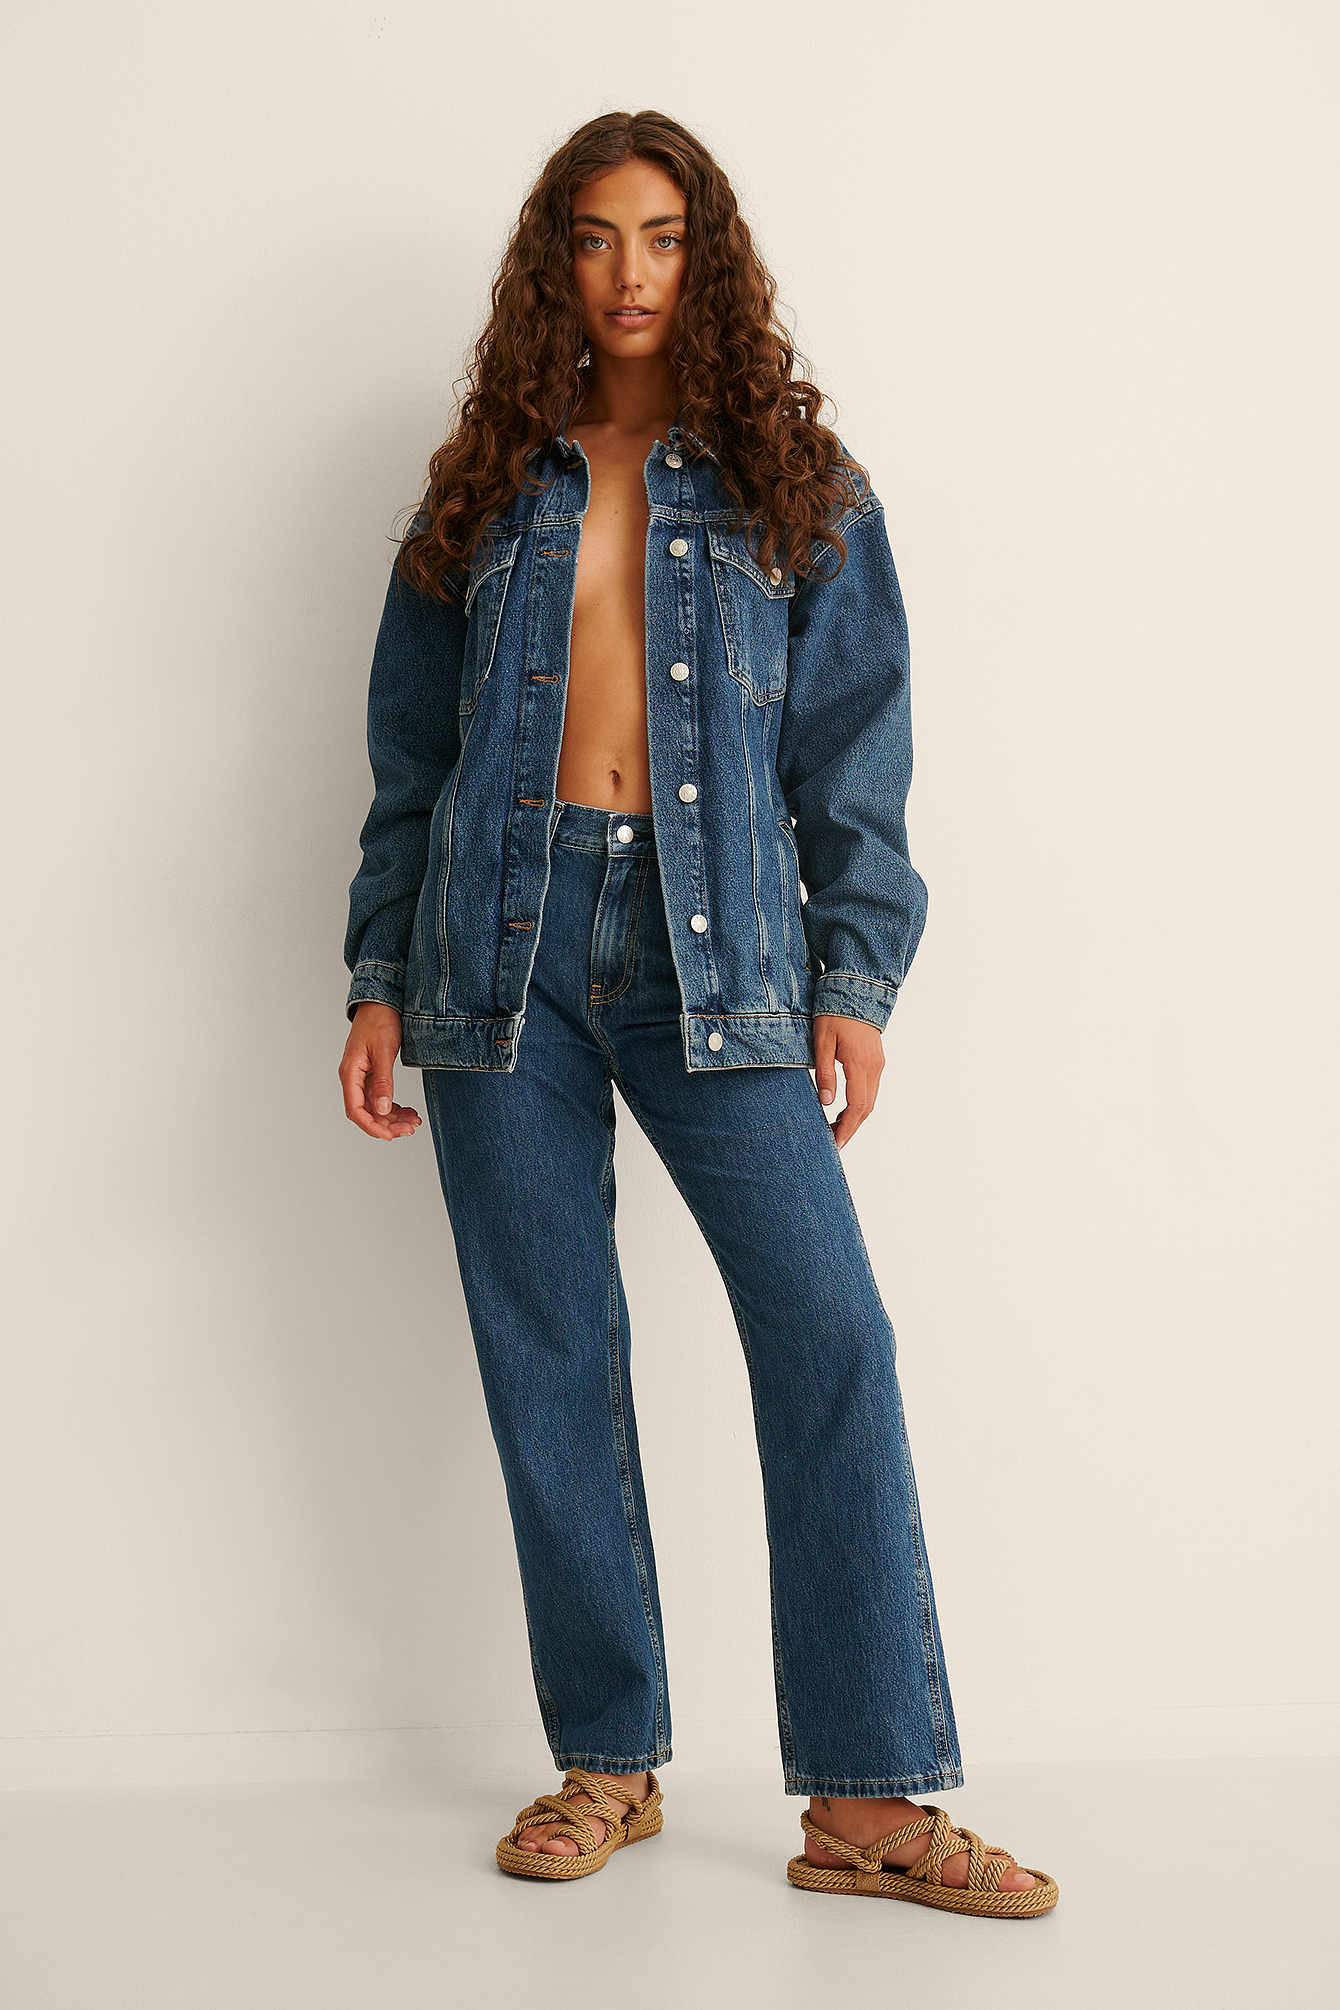 High Rise Straight Ankle Jeans Outfit.